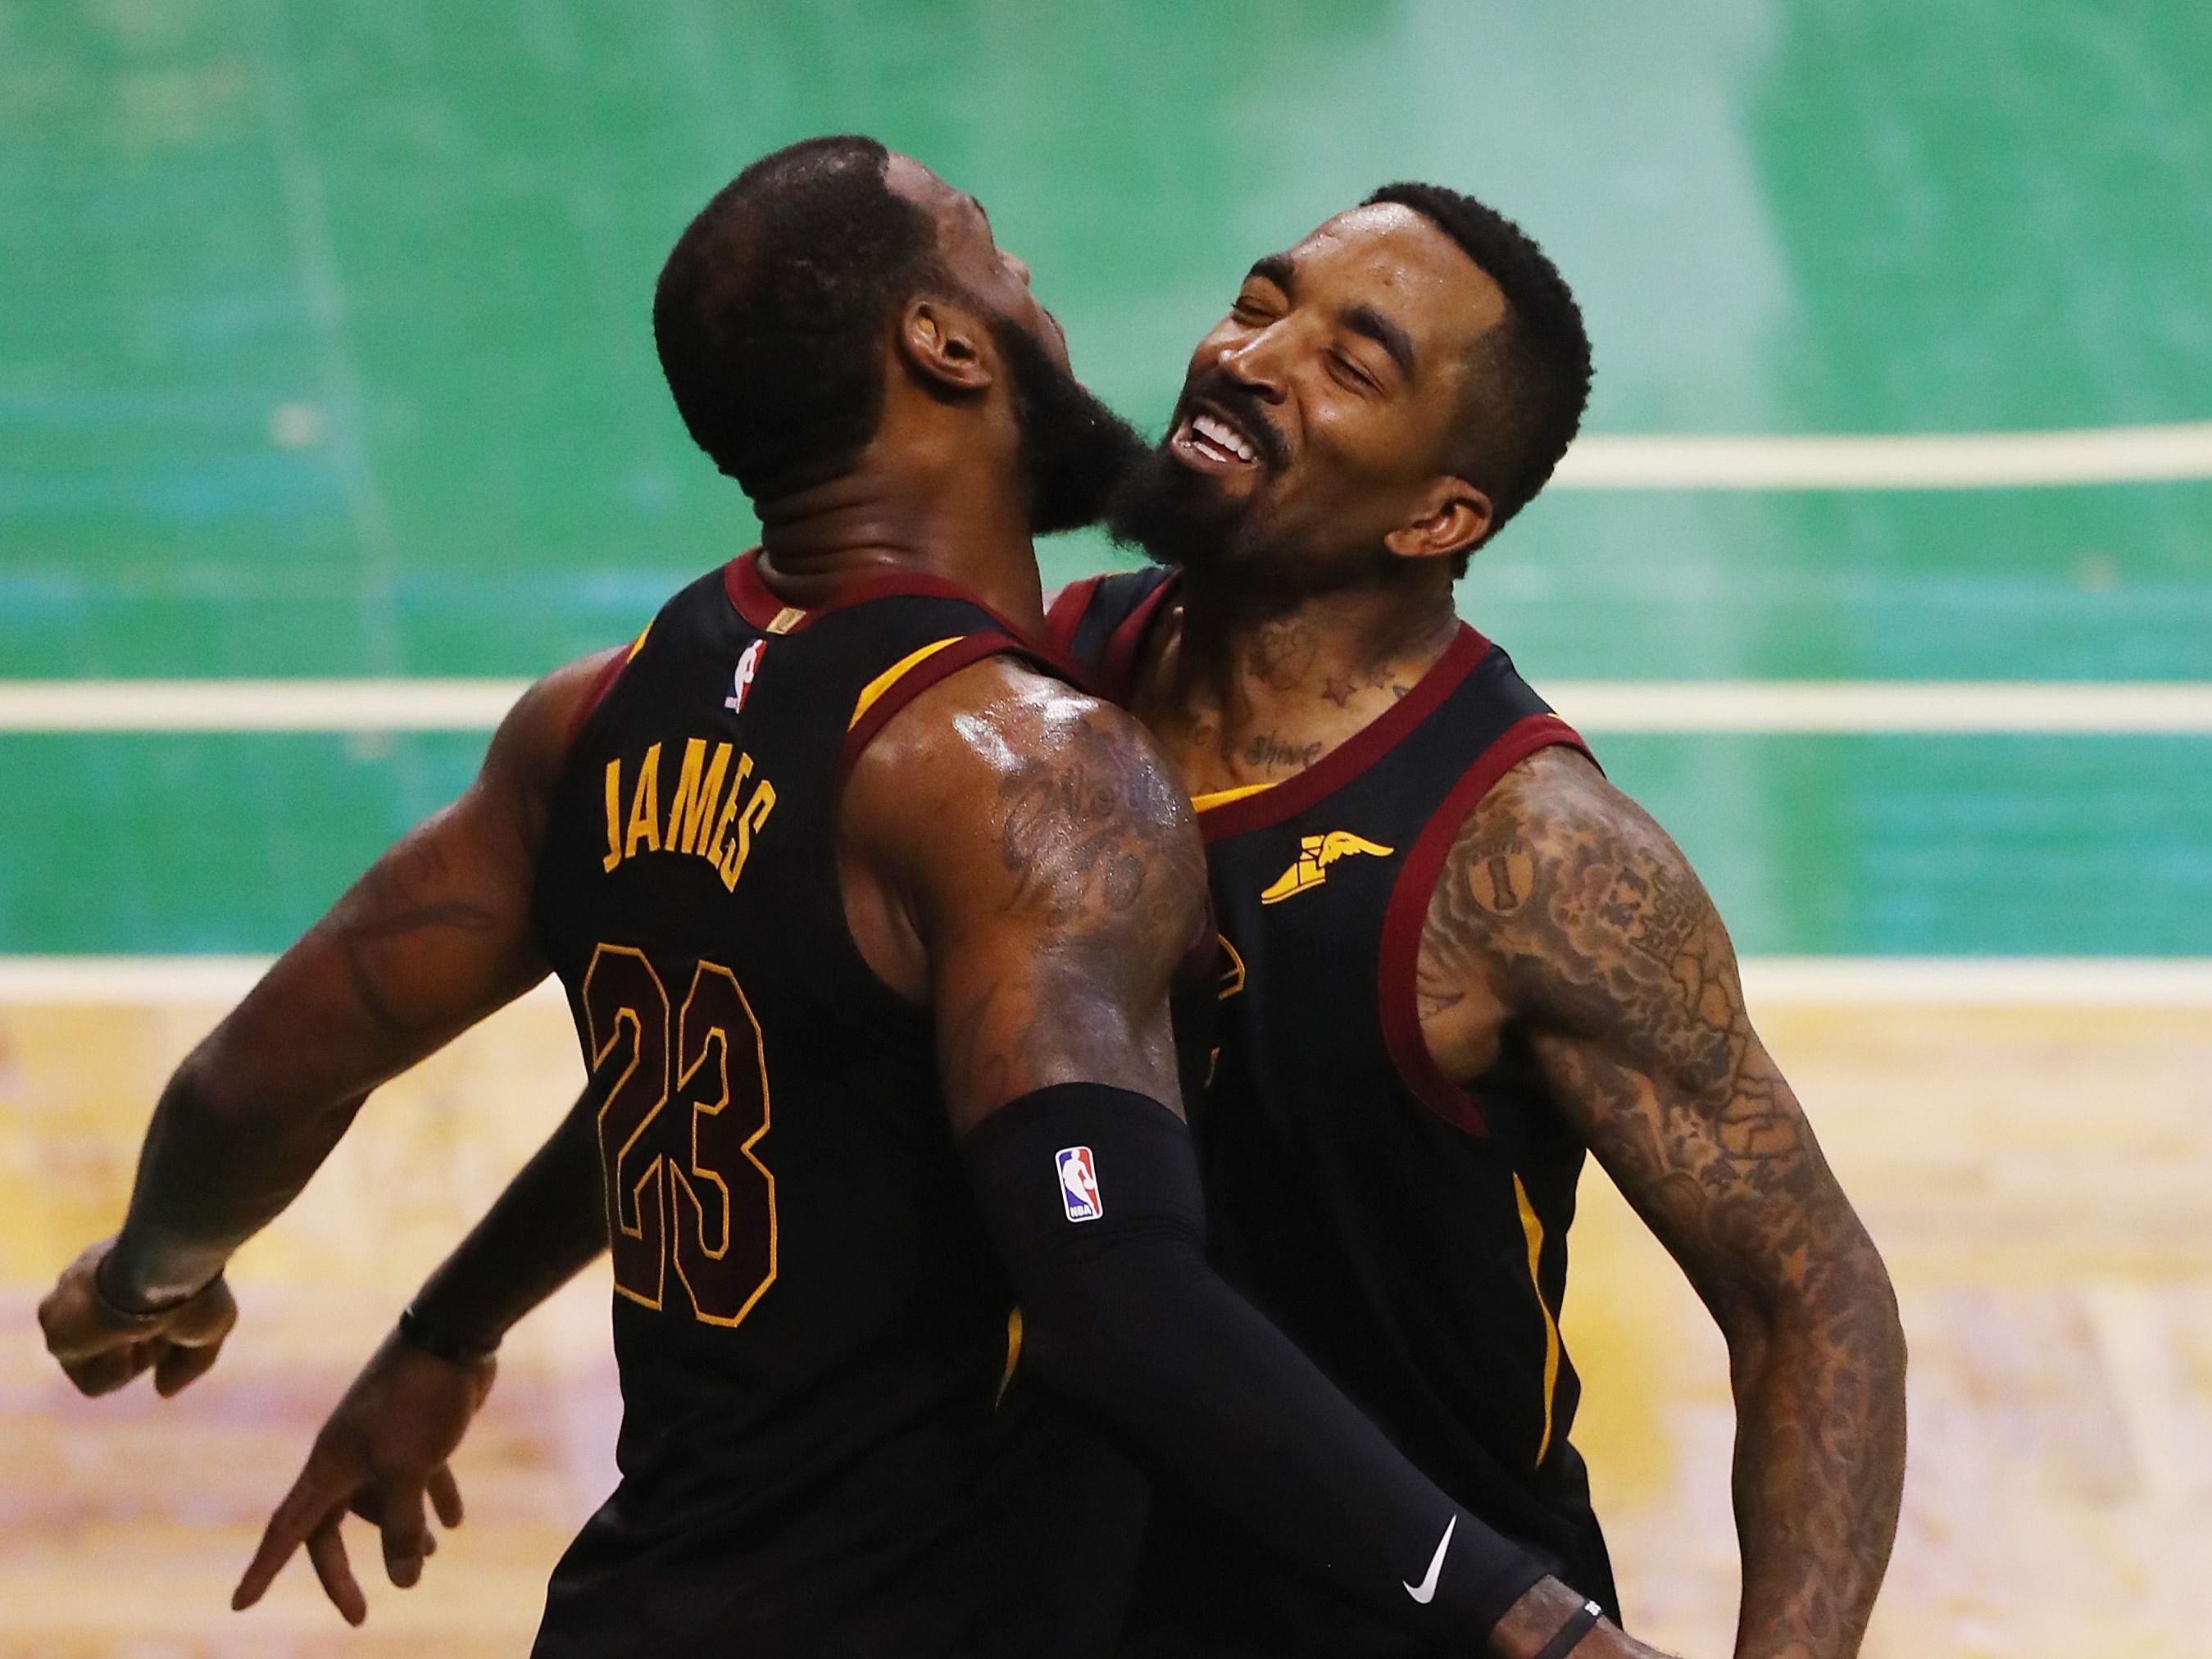 LeBron James and J.R. Smith playing for the Cleveland Cavaliers